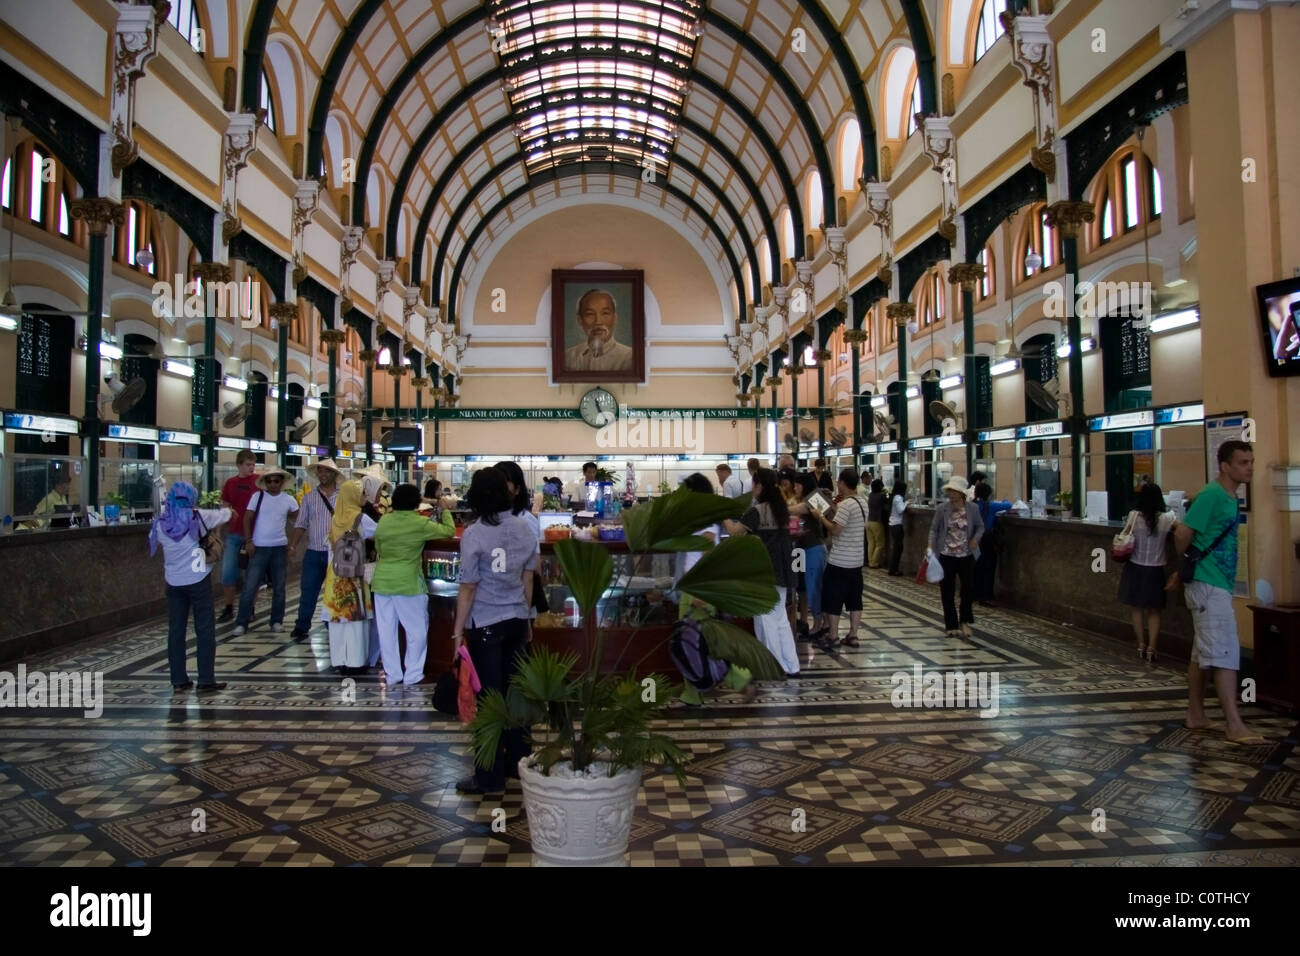 The interior of the French built General Post Office in Saigon (Ho Chi Minh CIty), Vietnam Stock Photo